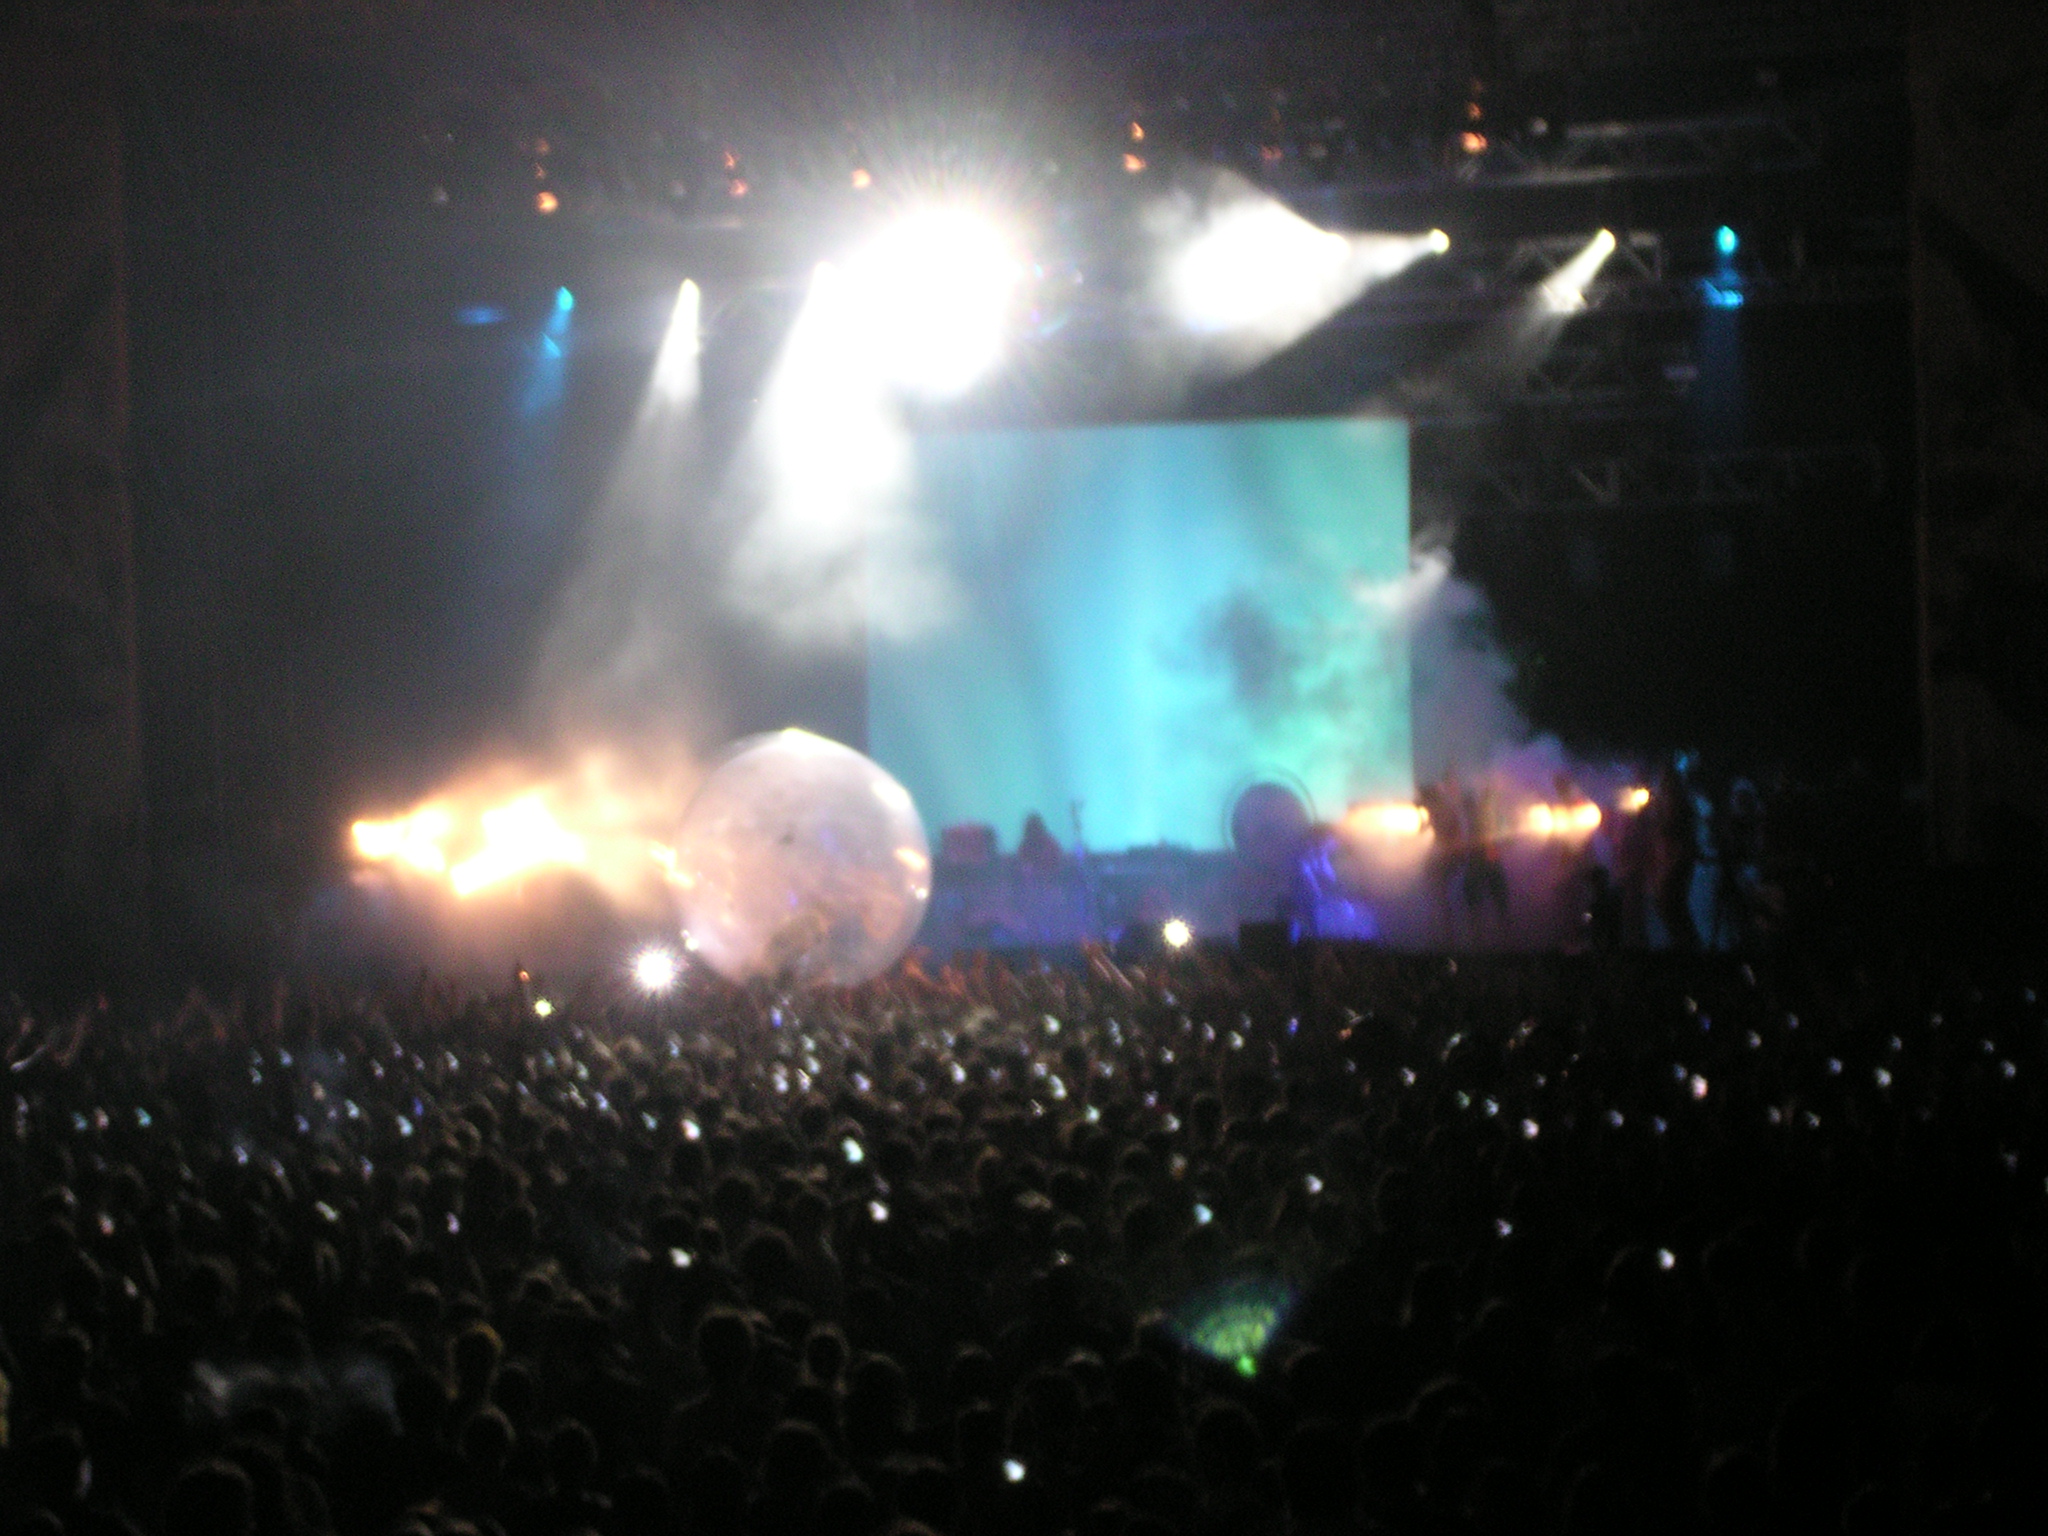 concert with stage lights and fans at night